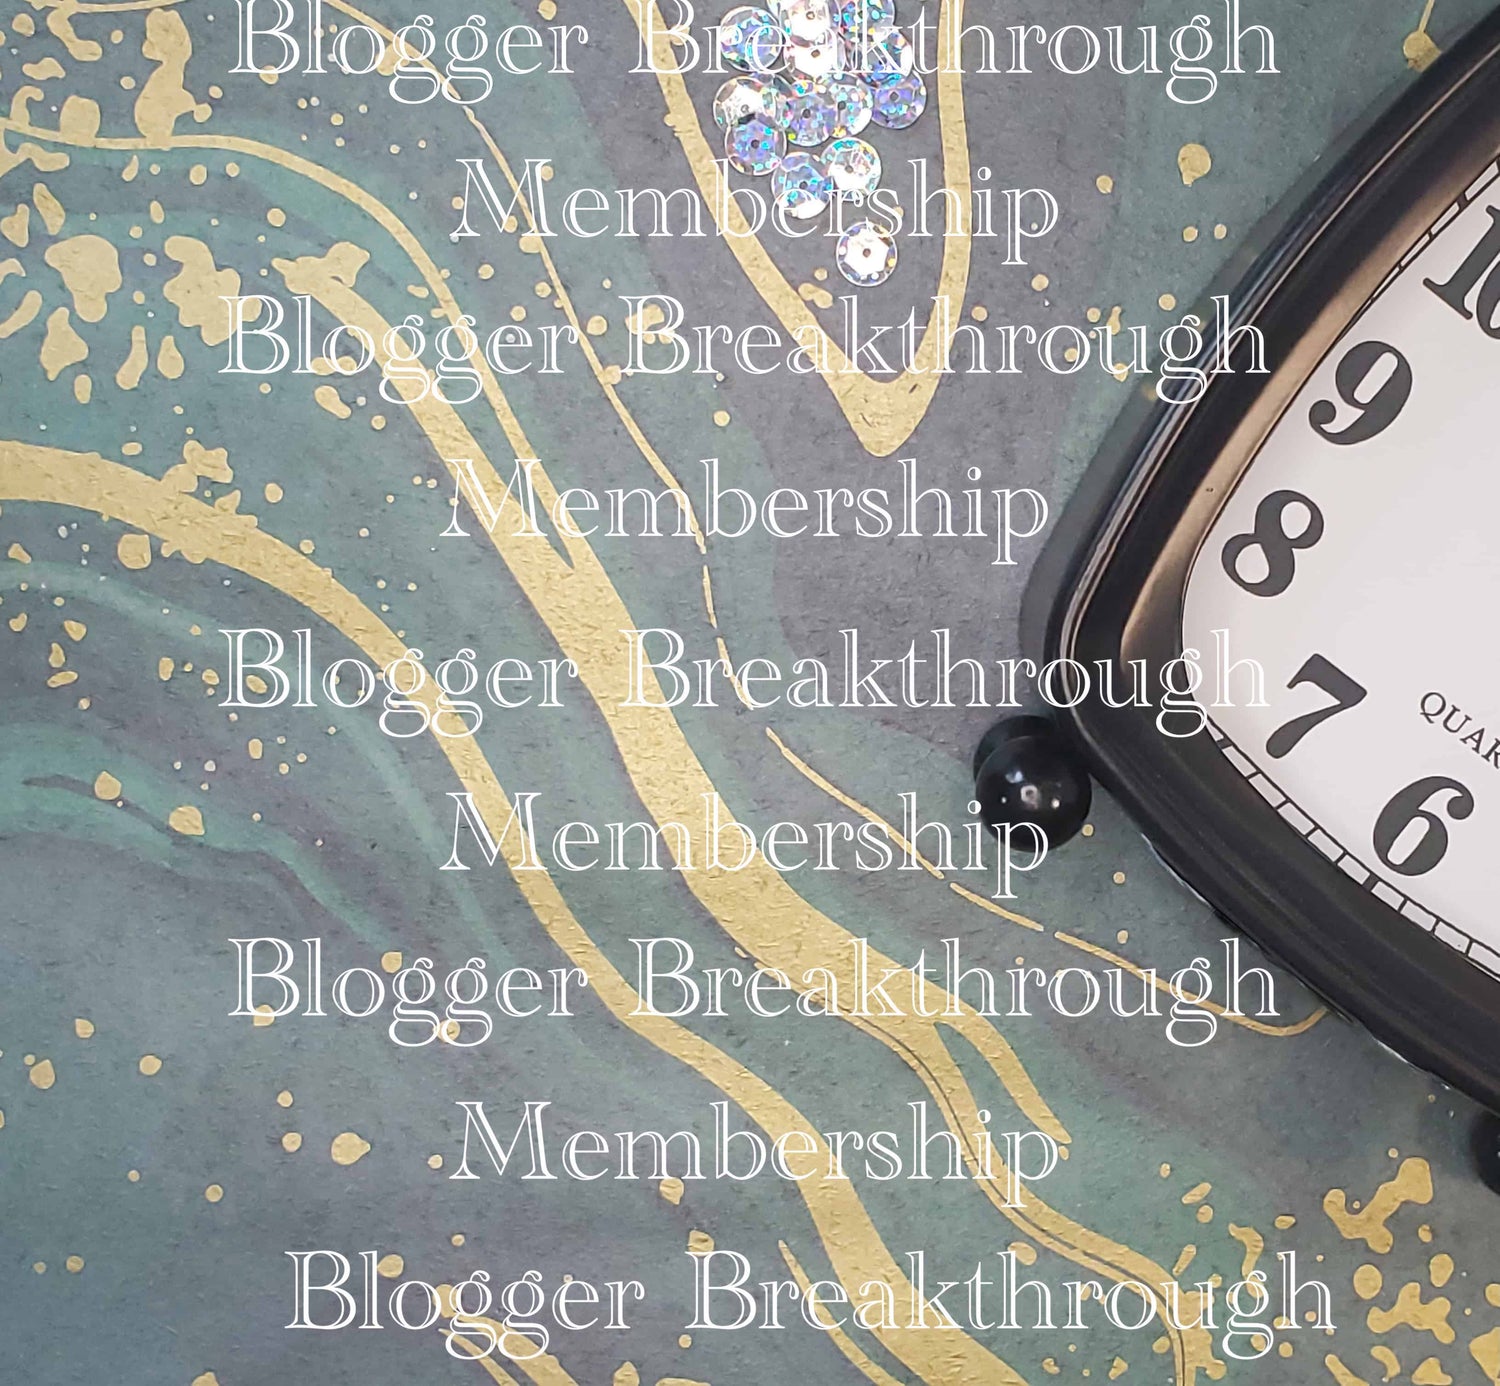 A clock on a gold background with the words &quot;Health and New Year Theme Stock Photos (set of 5)&quot; - perfect for stock photos by Blogger Breakthrough Summit.